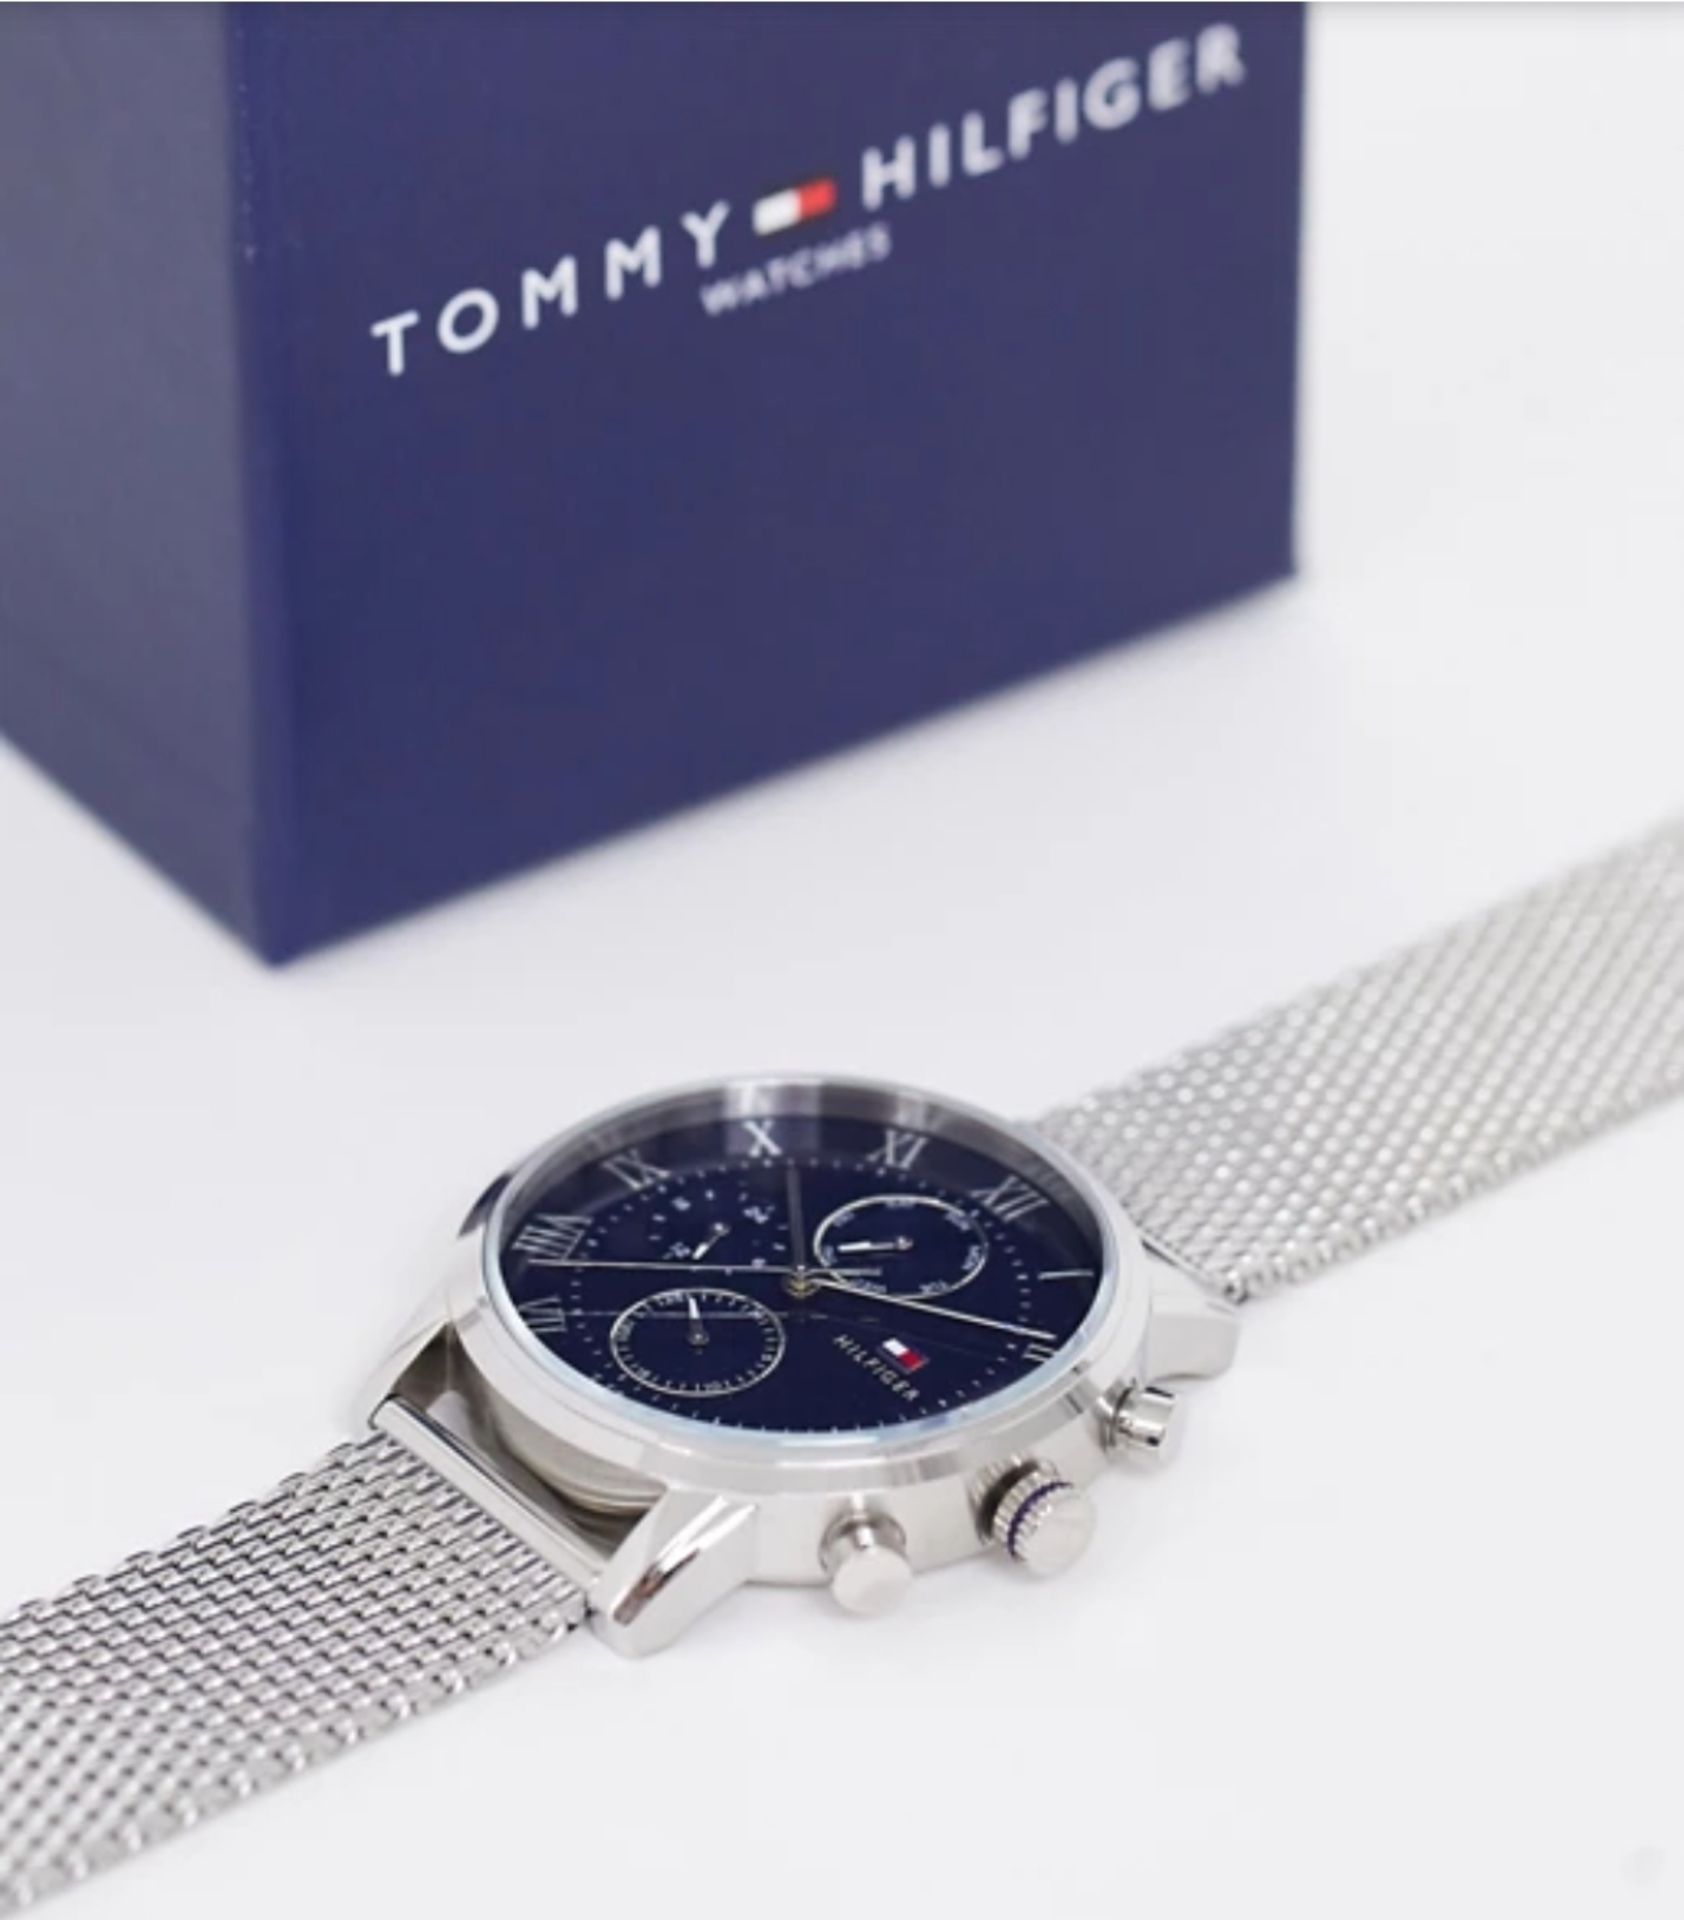 Tommy Hilfiger 1791398 Kane Men's 44mm Silver Mesh Band Chronograph Watch - Image 4 of 7